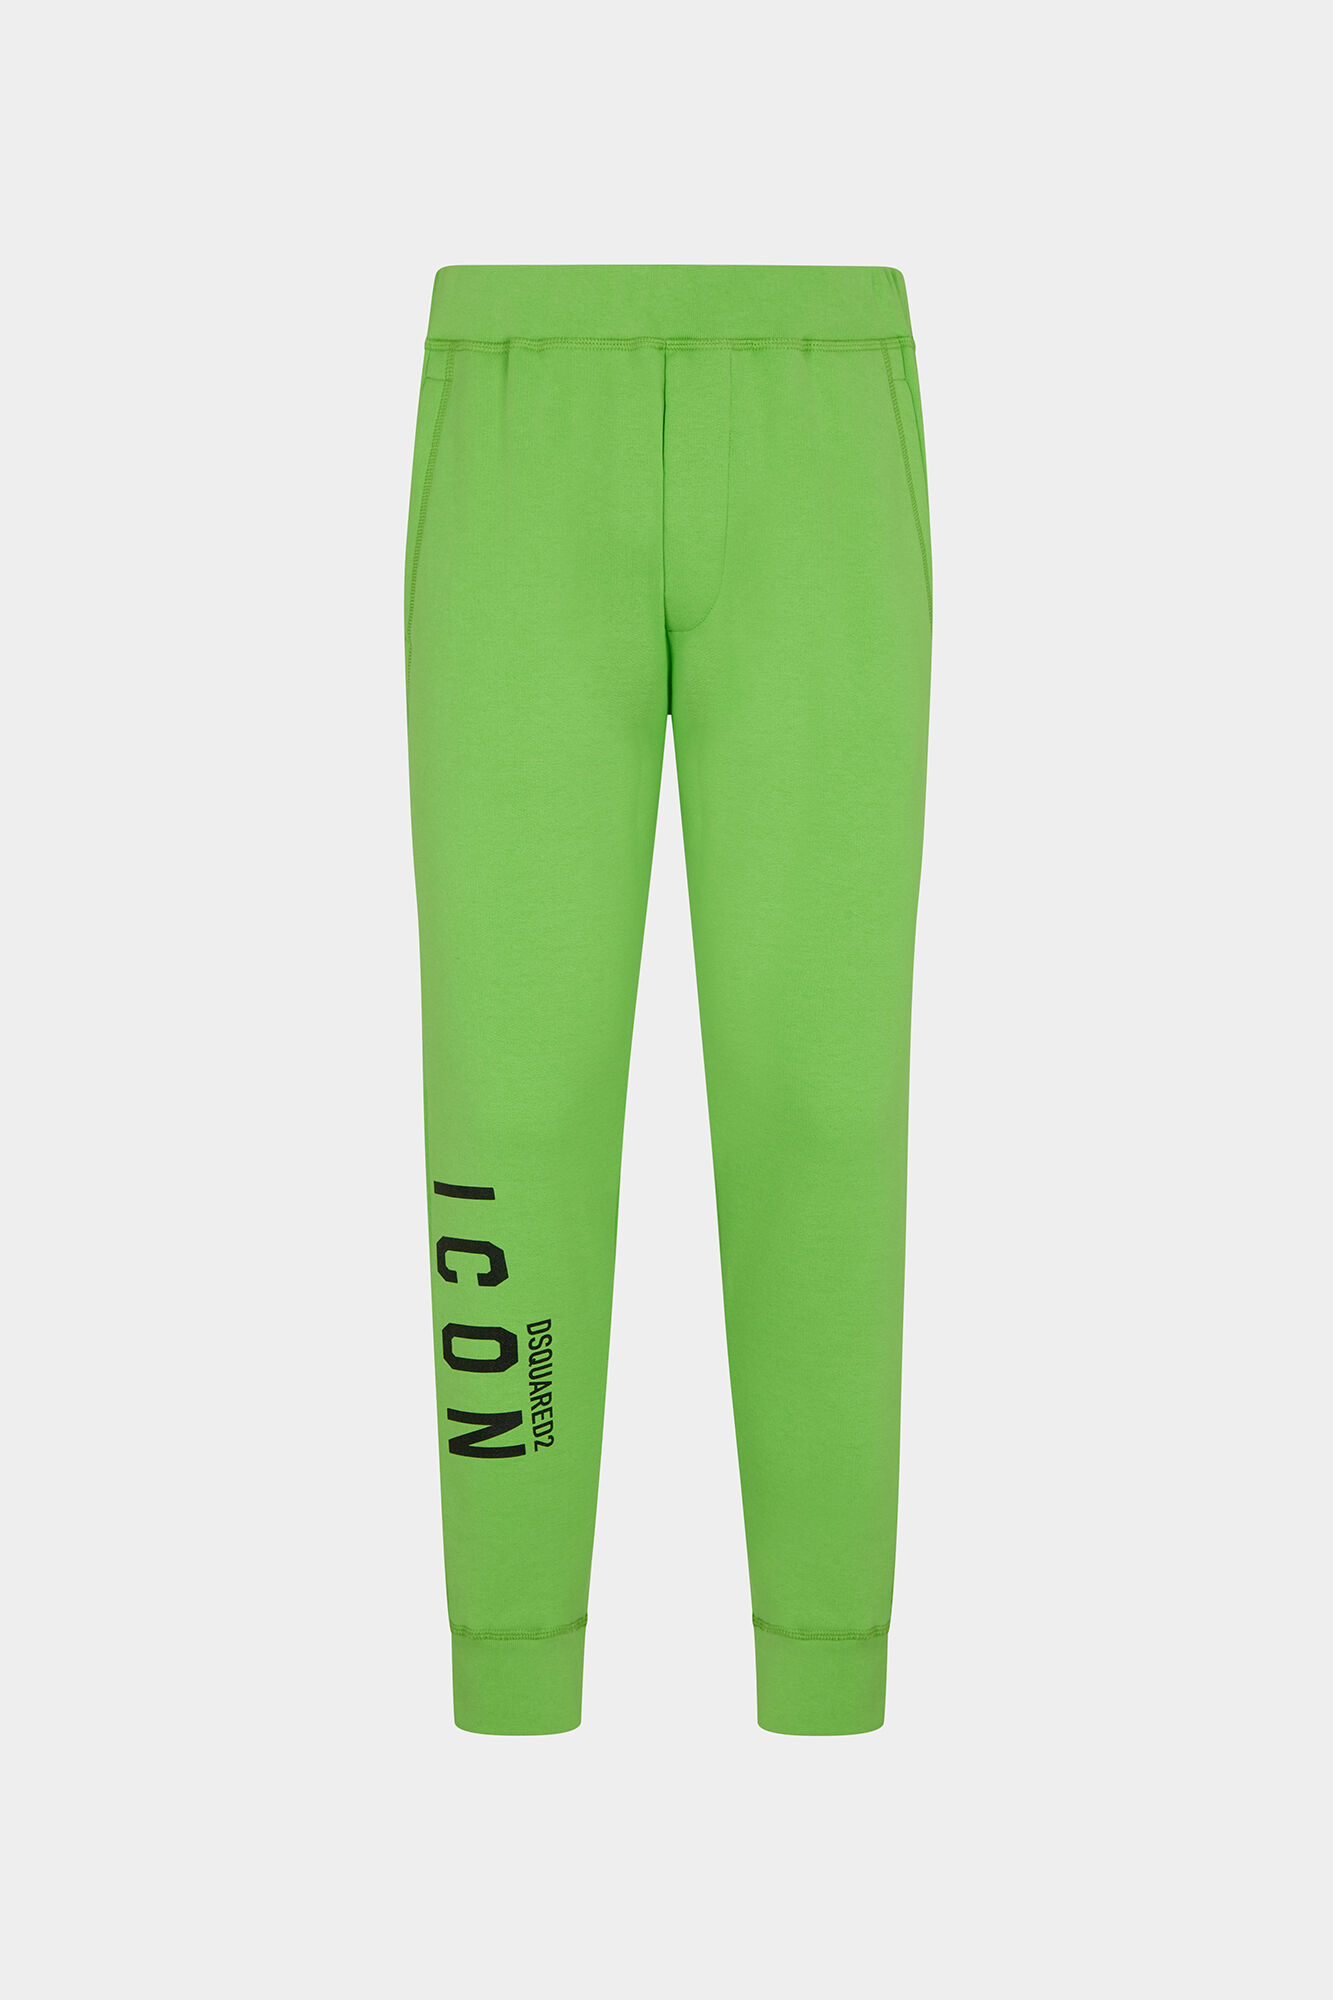 Men's Trousers and Shorts ICON | DSQUARED2